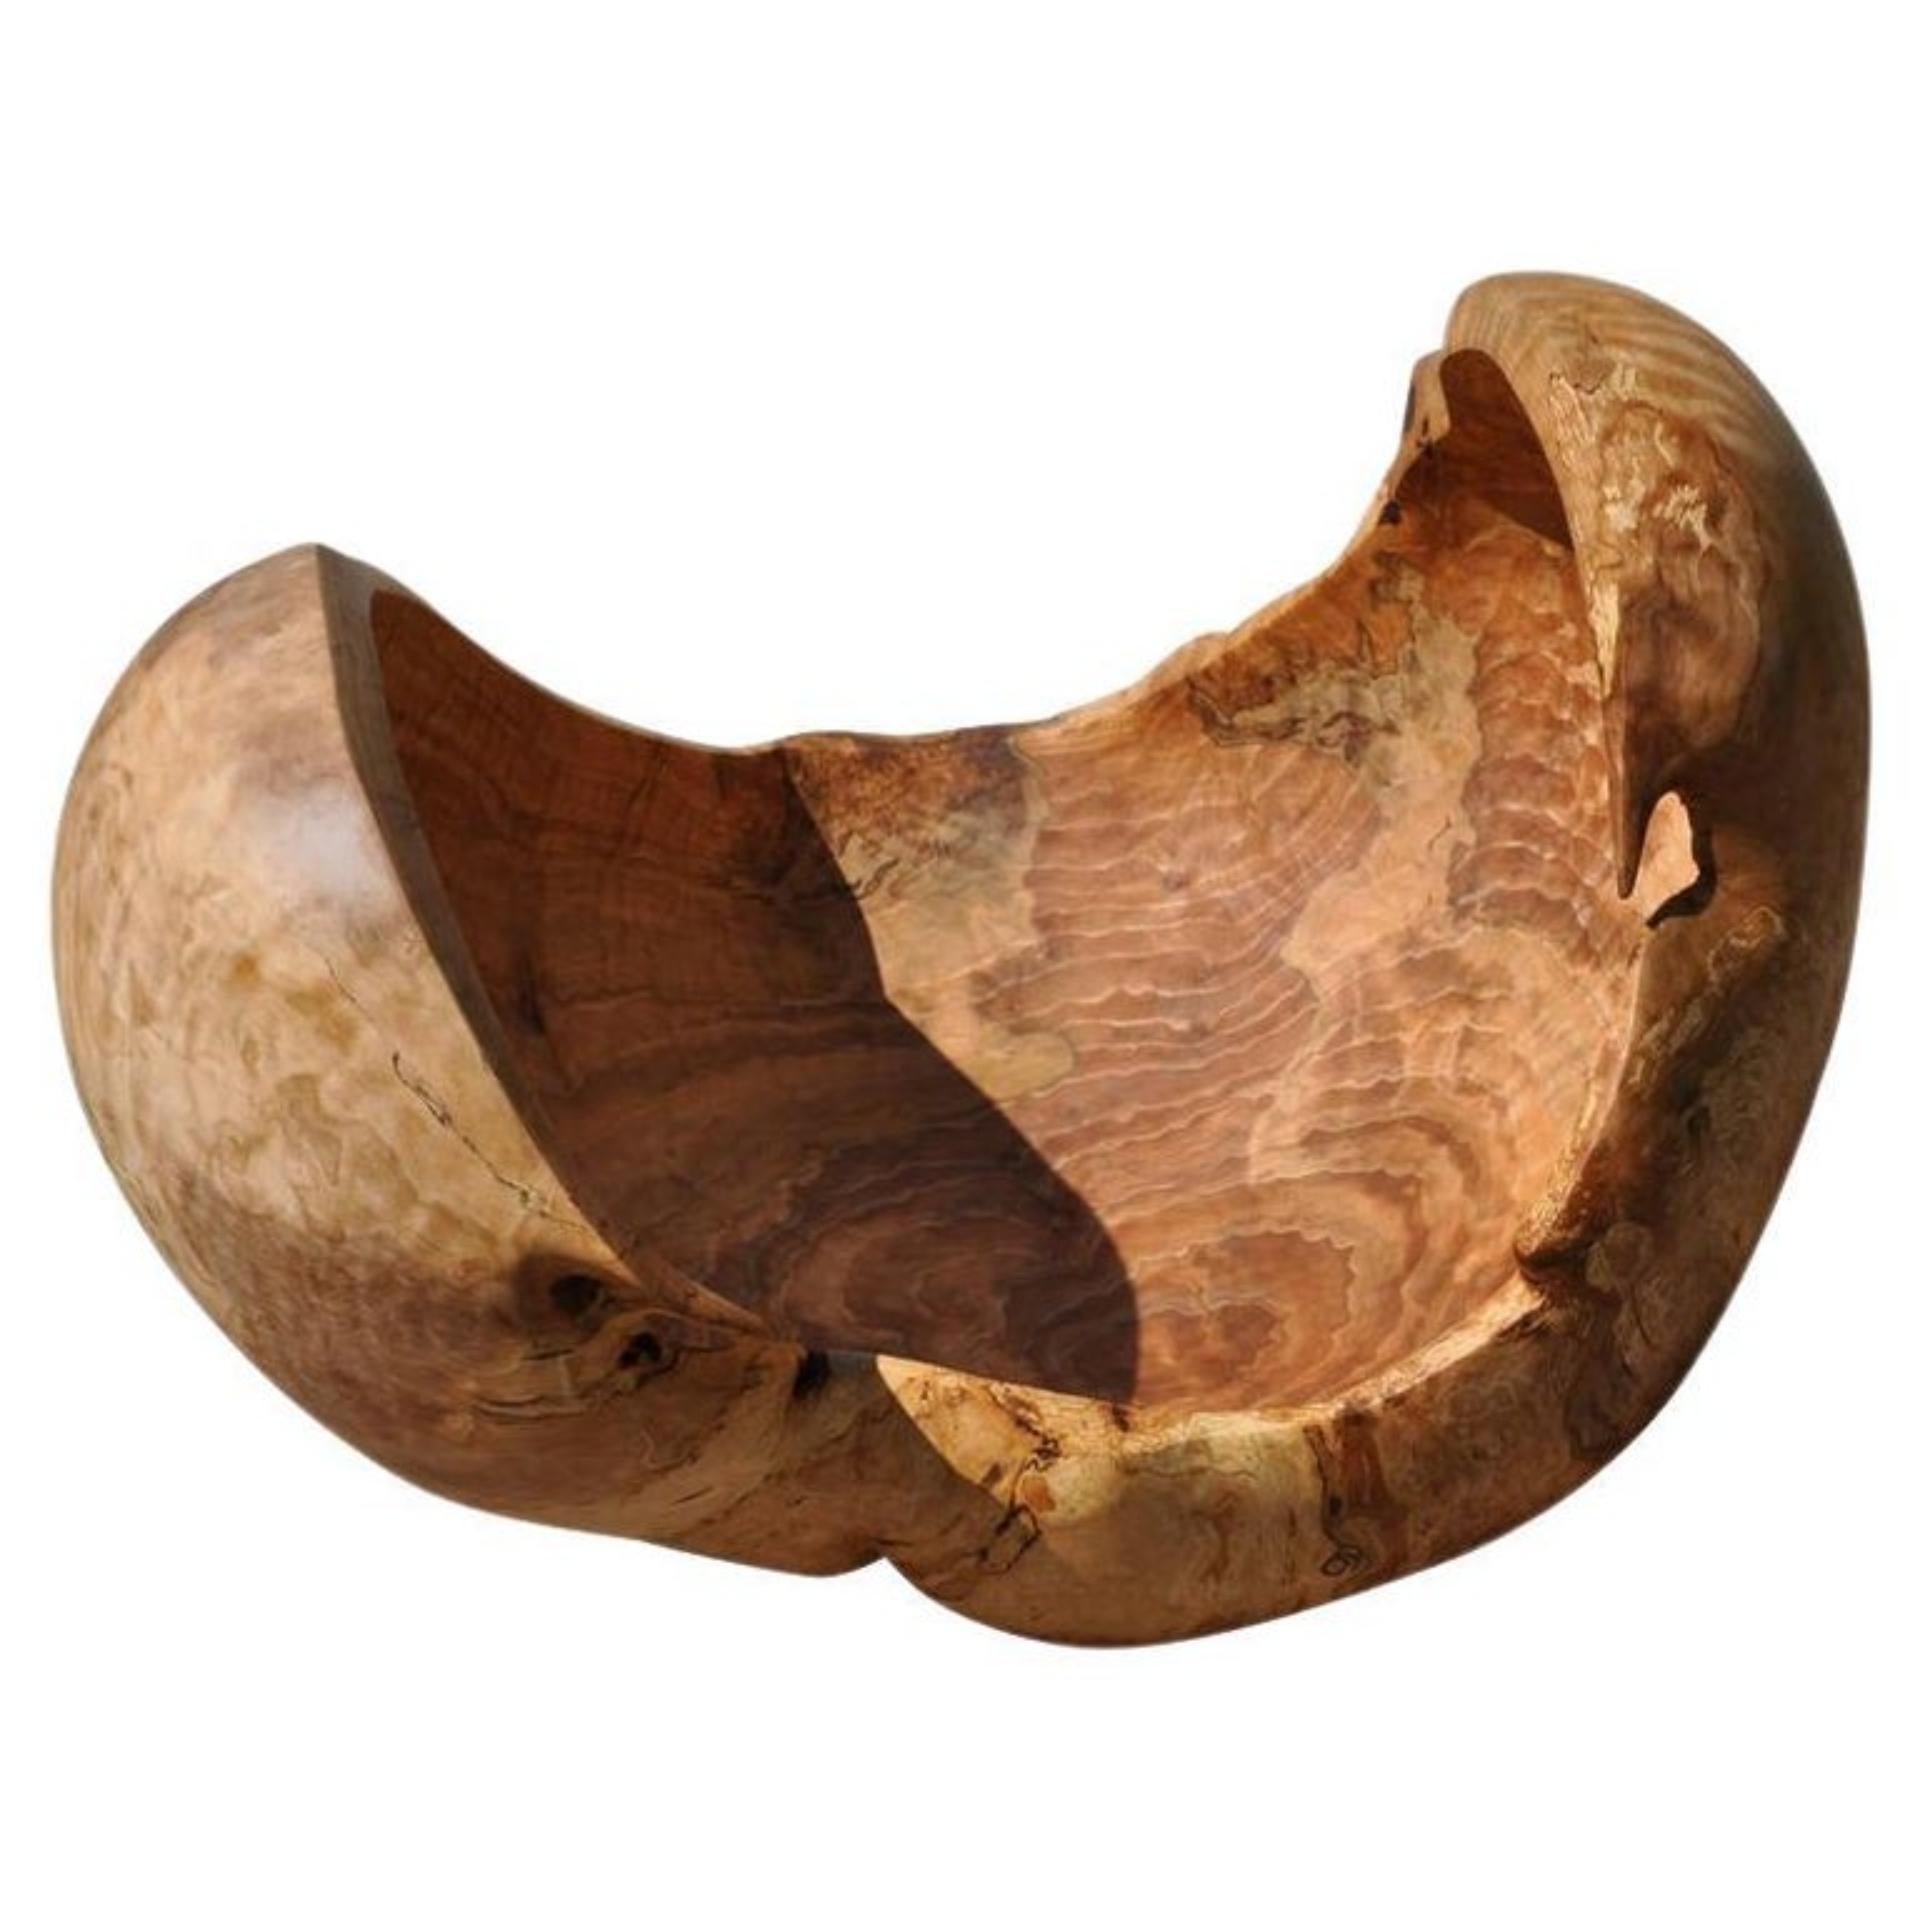 Unique signed bowl by Jörg Pietschmann.
Bowl beech · V1346
Measures: H 76 x W 90 x D 75 cm
Large bowl sculpture from the bulges of a beech
tree. Polished oil finish.

In Pietschmann’s sculptures, trees that for centuries were part of a landscape and